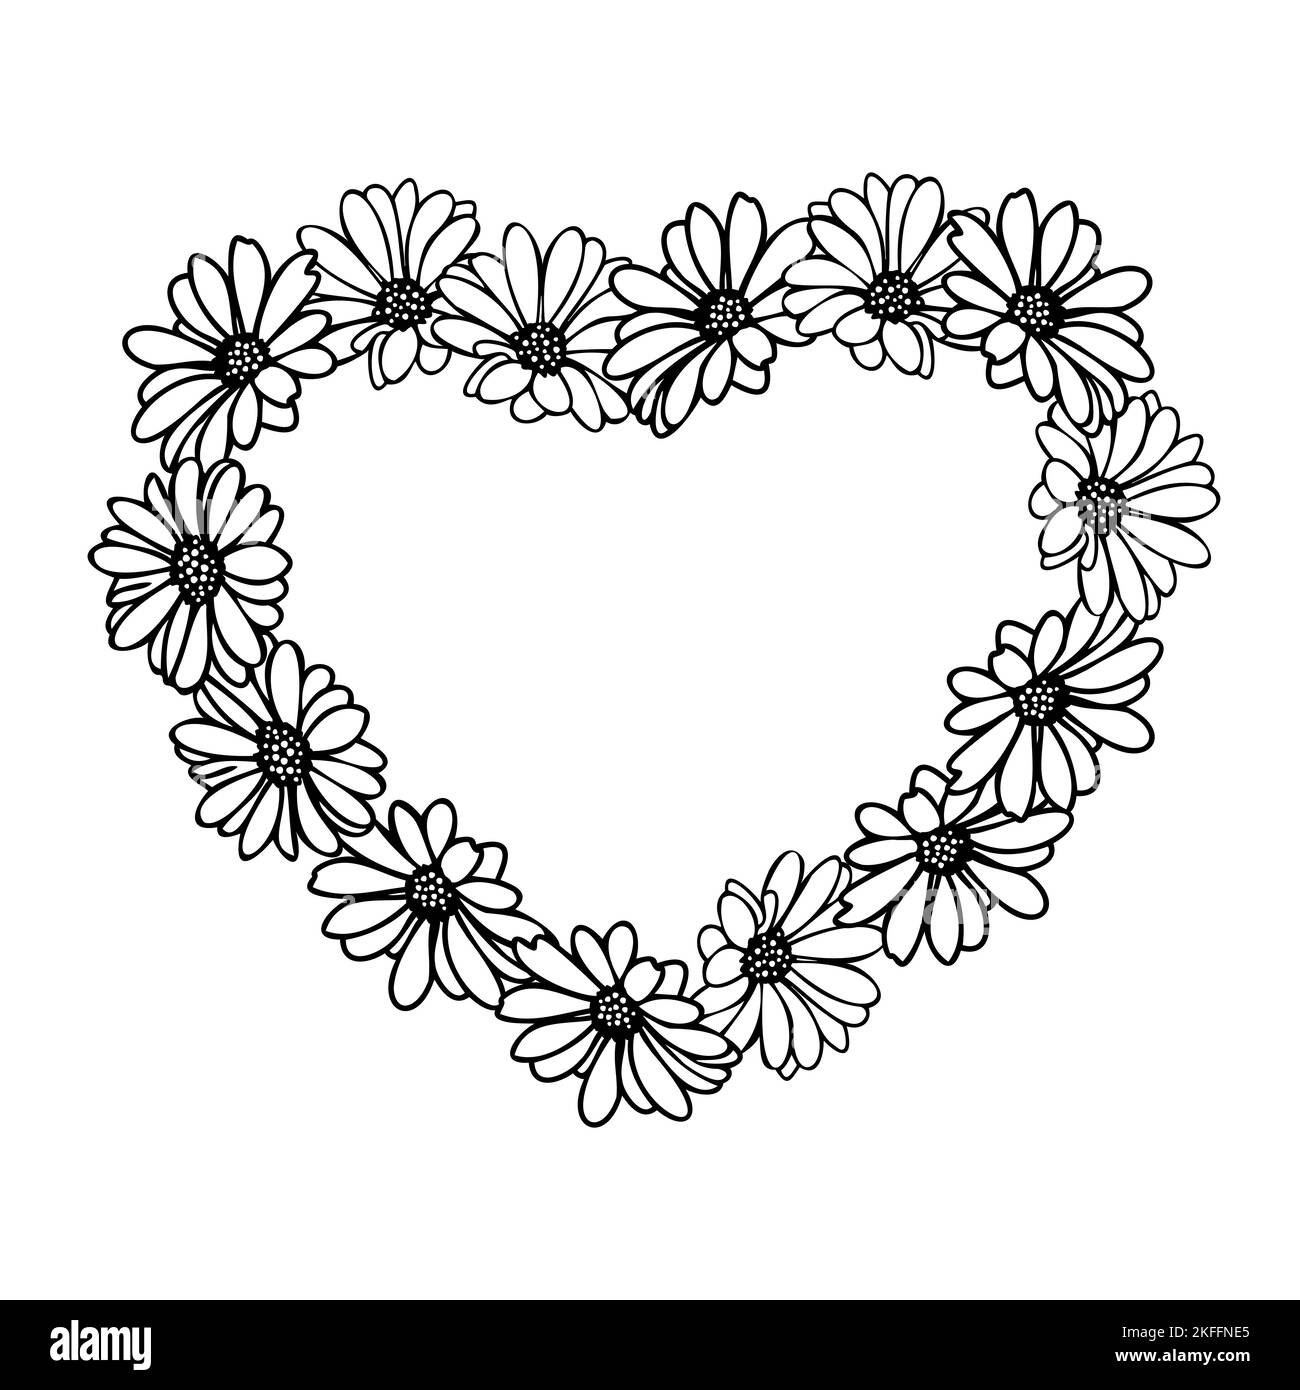 Valentines day floral heart frame with daisy flower Stock Vector